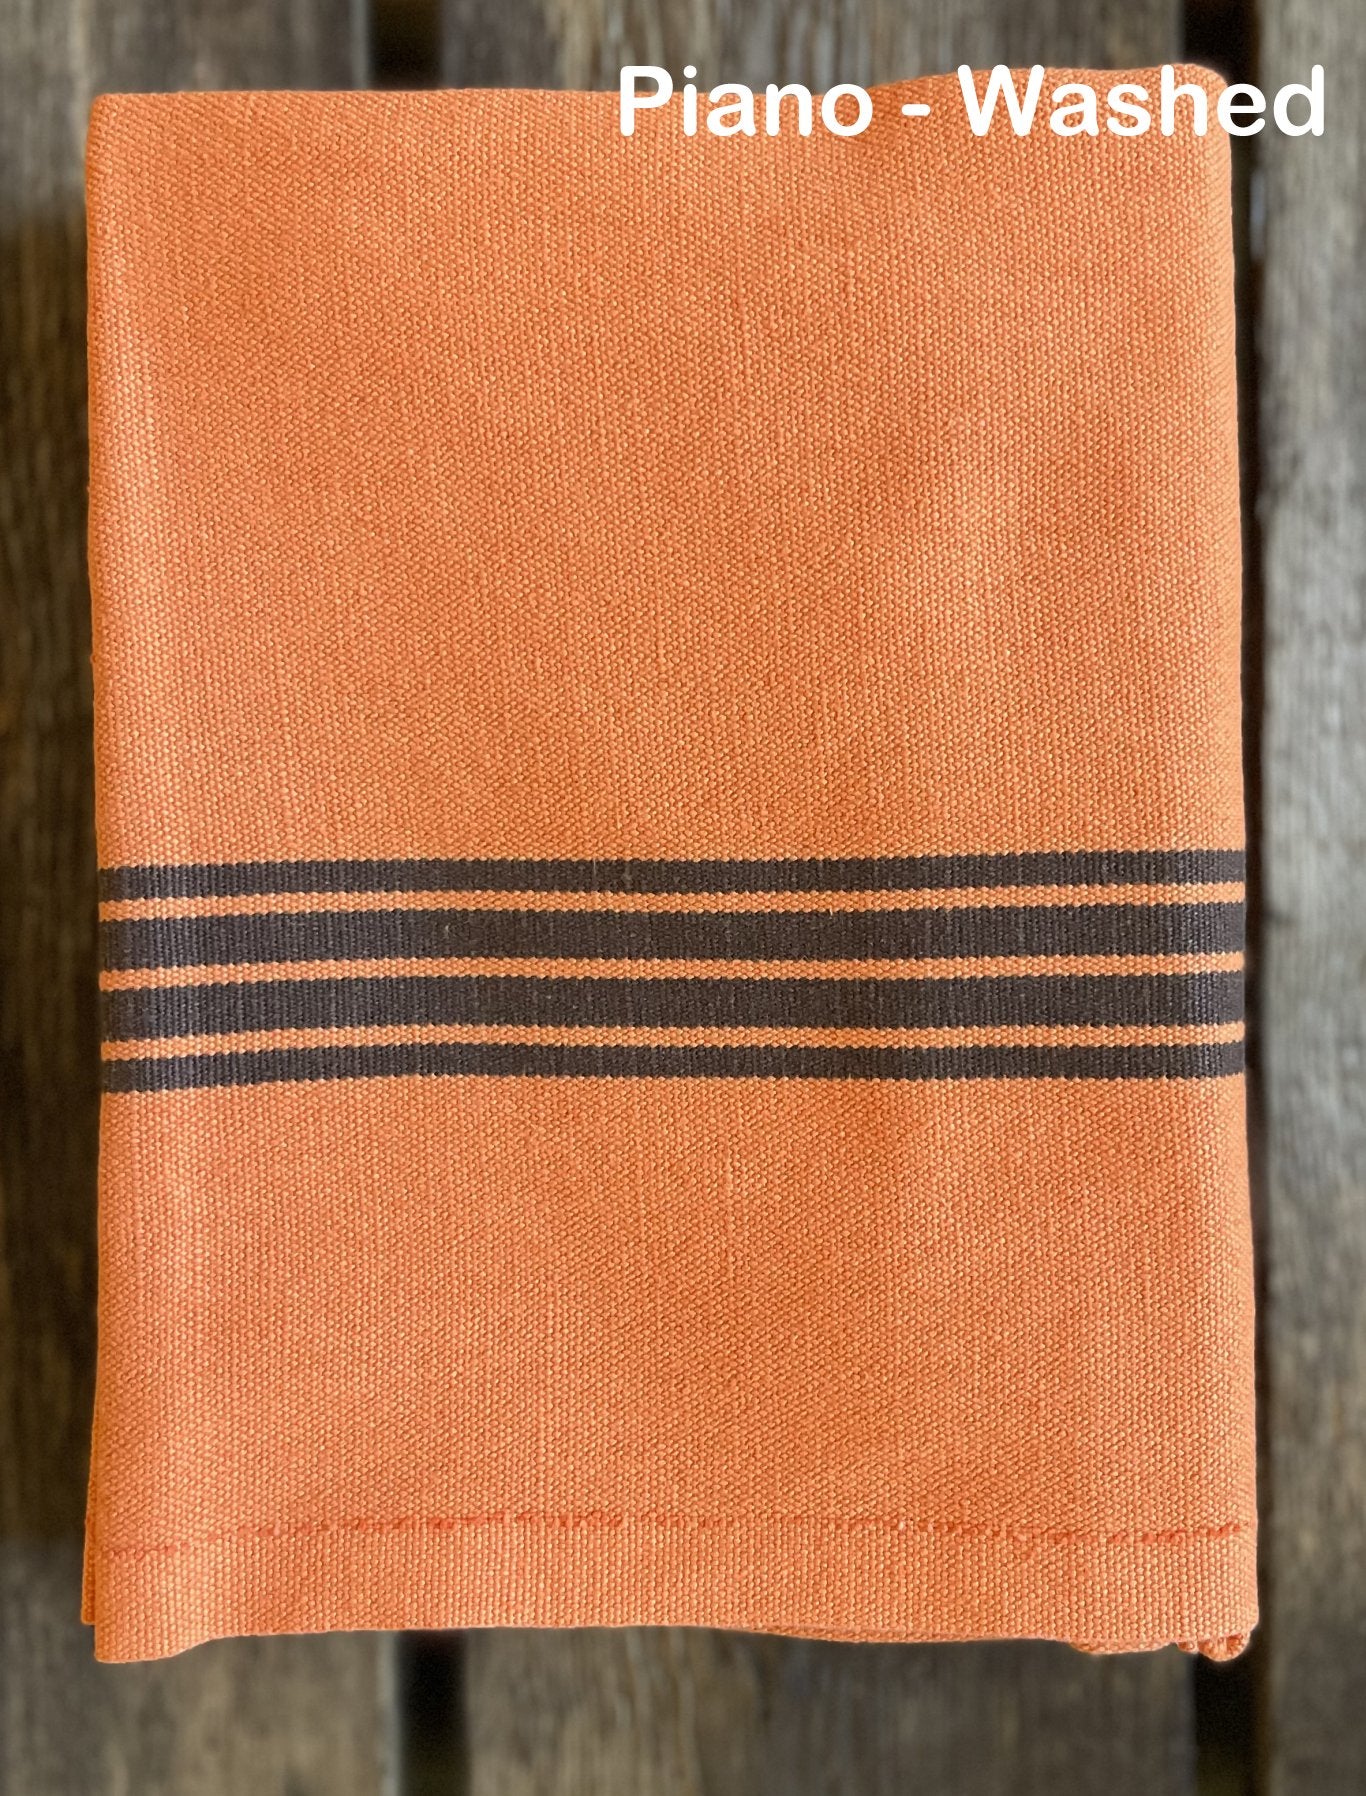 Charvet Editions "Piano" (Orange),  Washed, woven linen union tea towel. Made in France.